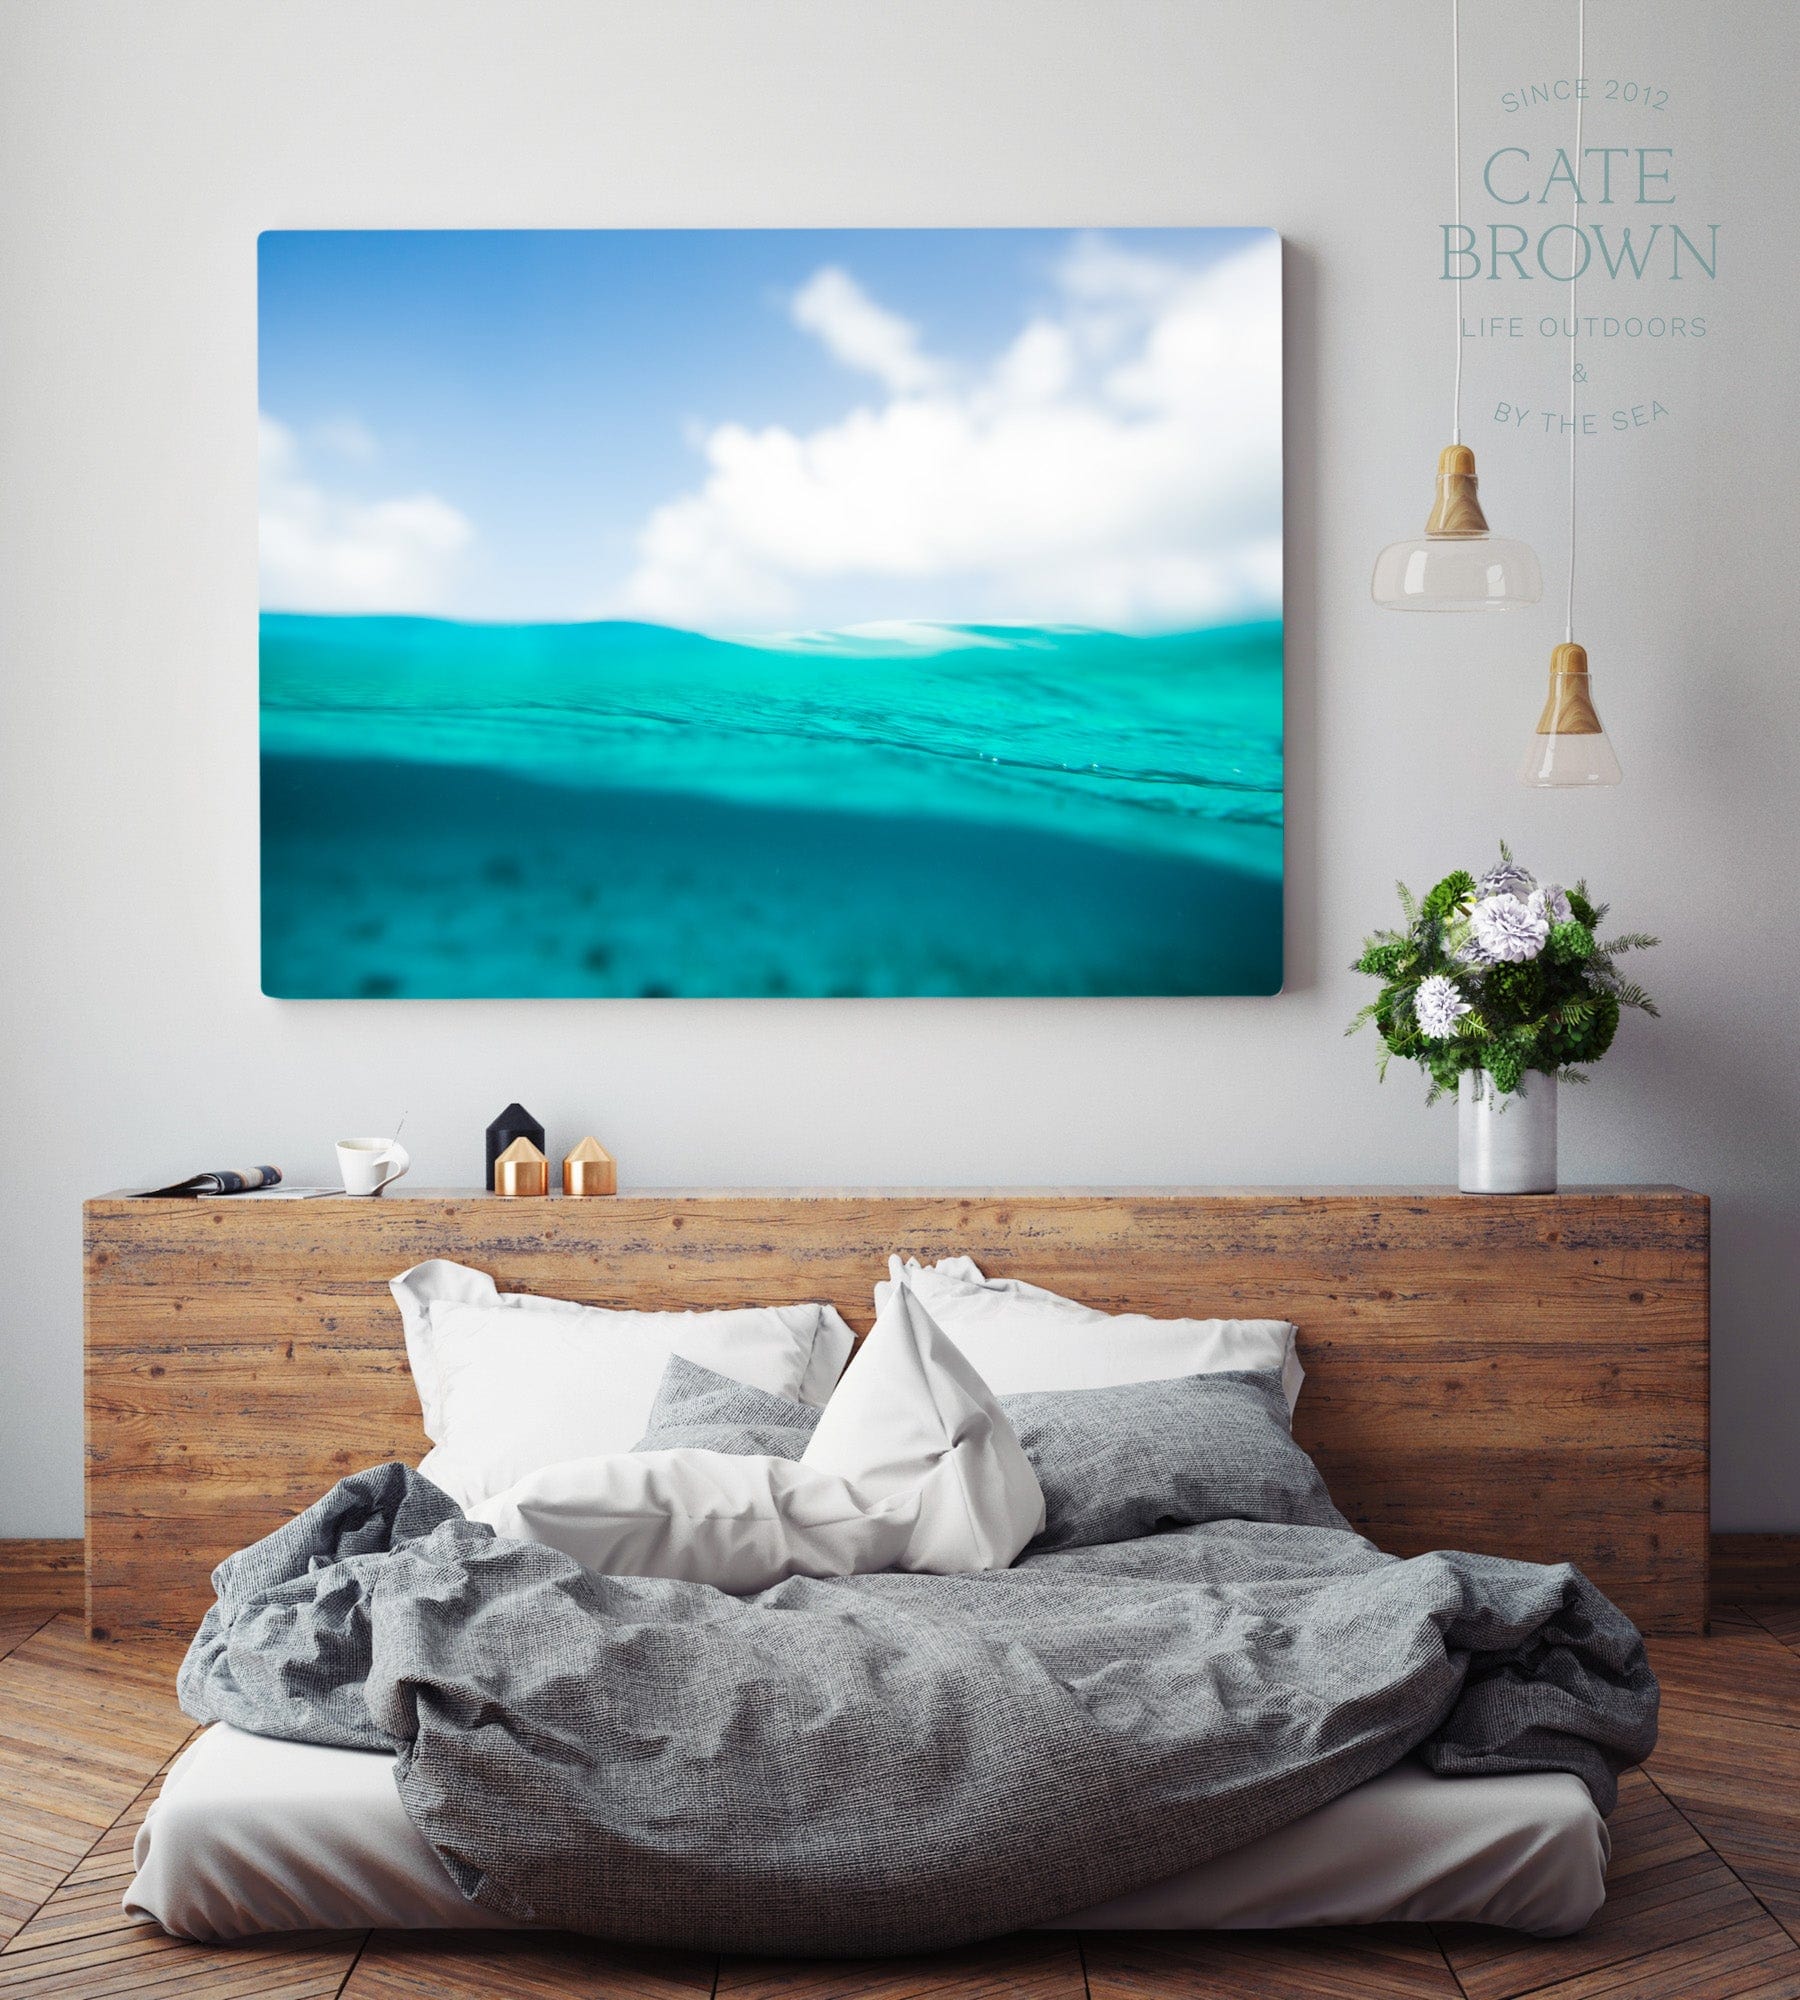 Cate Brown Photo Canvas / 16"x24" / None (Print Only) Sea & Sky  //  Ocean Photography Made to Order Ocean Fine Art